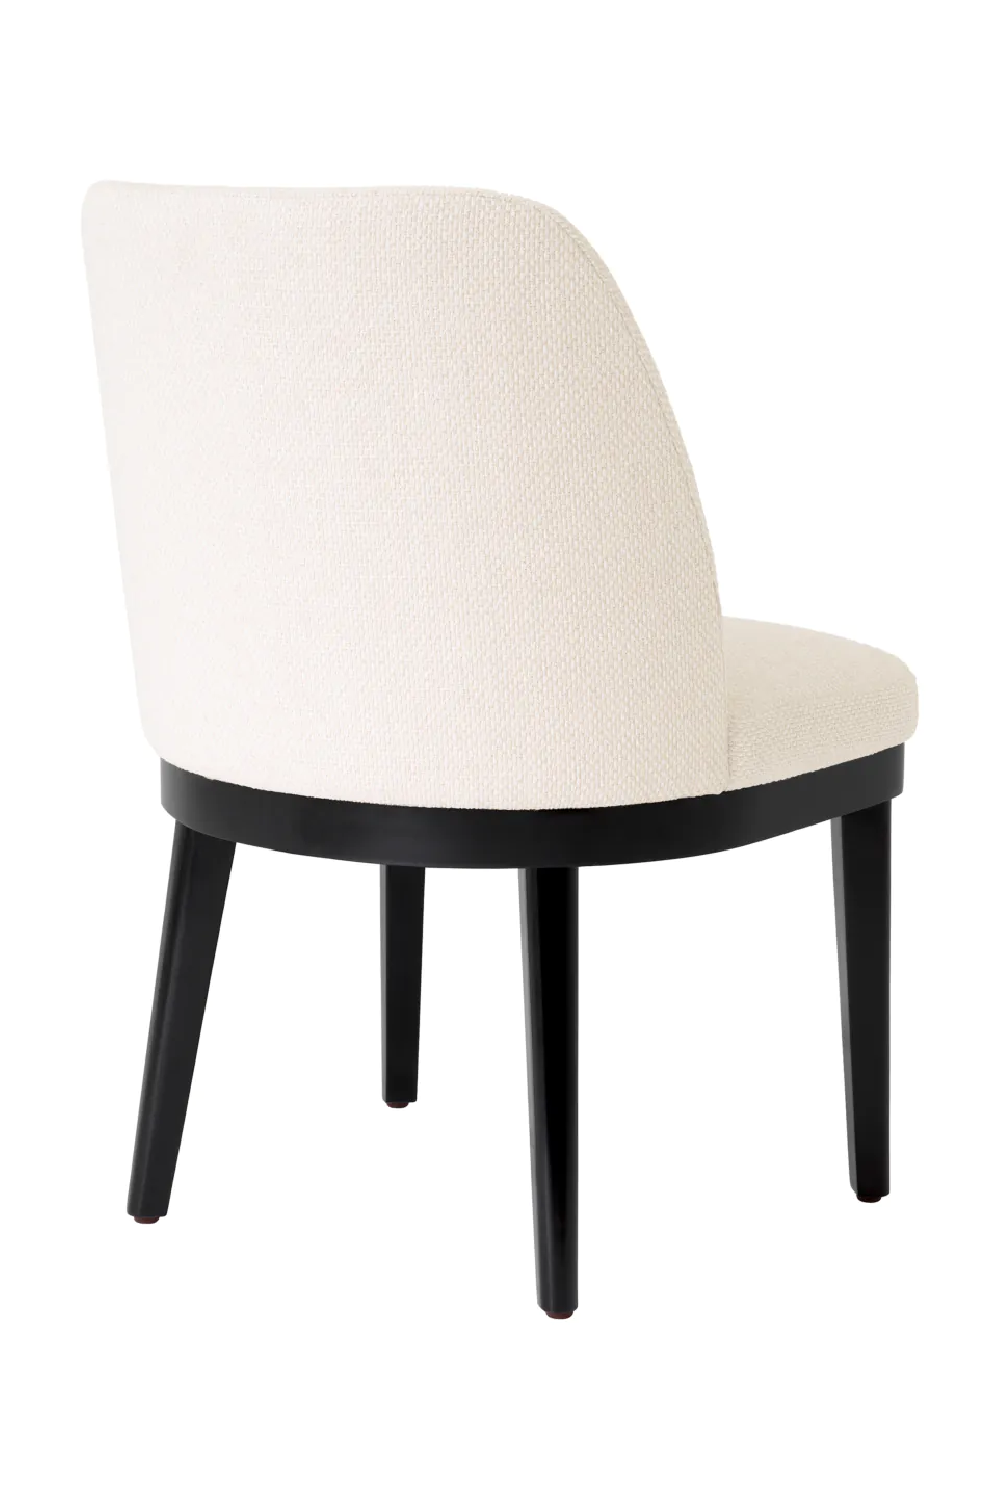 Minimalist Upholstered Dining Chair | Eichholtz Costa | Oroa.com